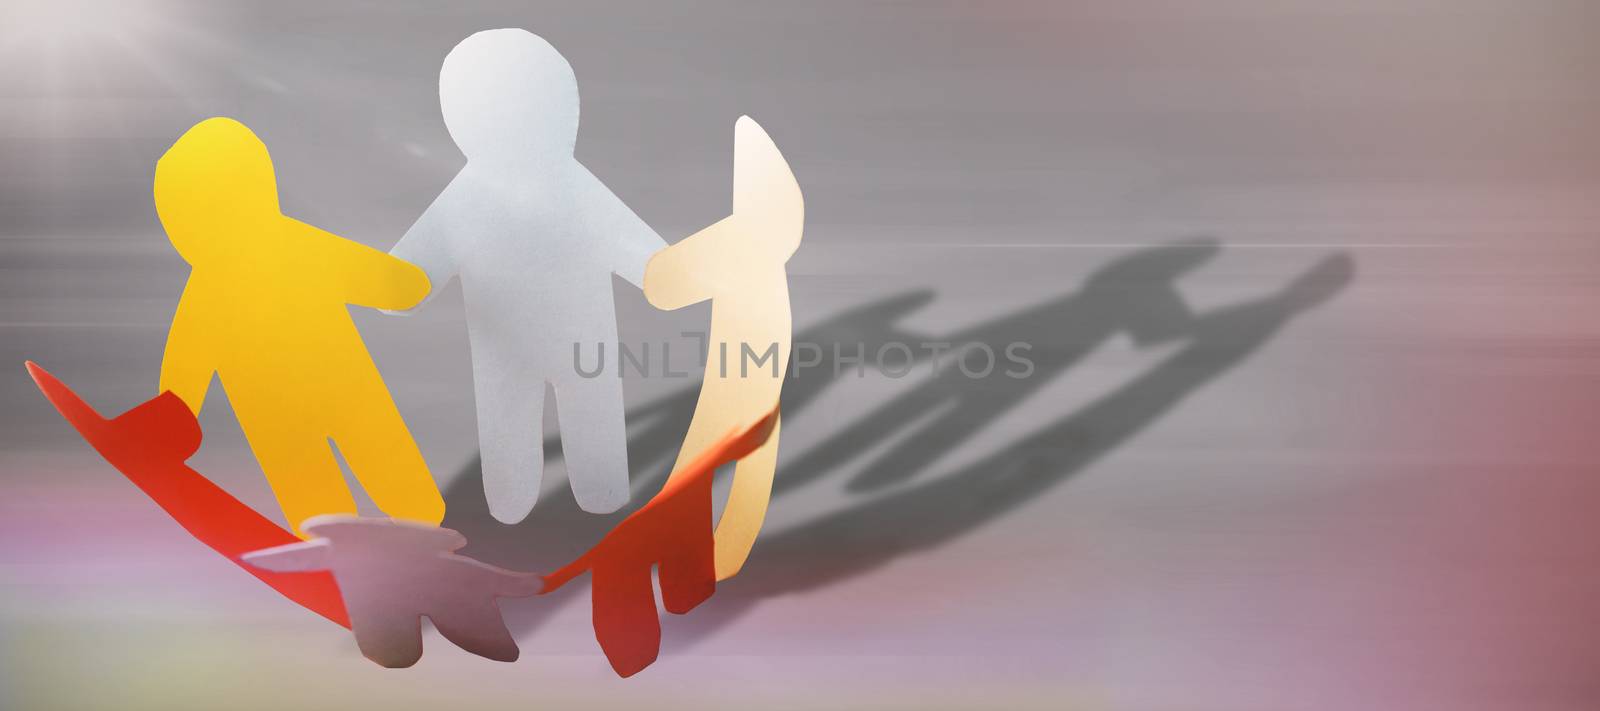 Composite image of man holding hands in circle by Wavebreakmedia